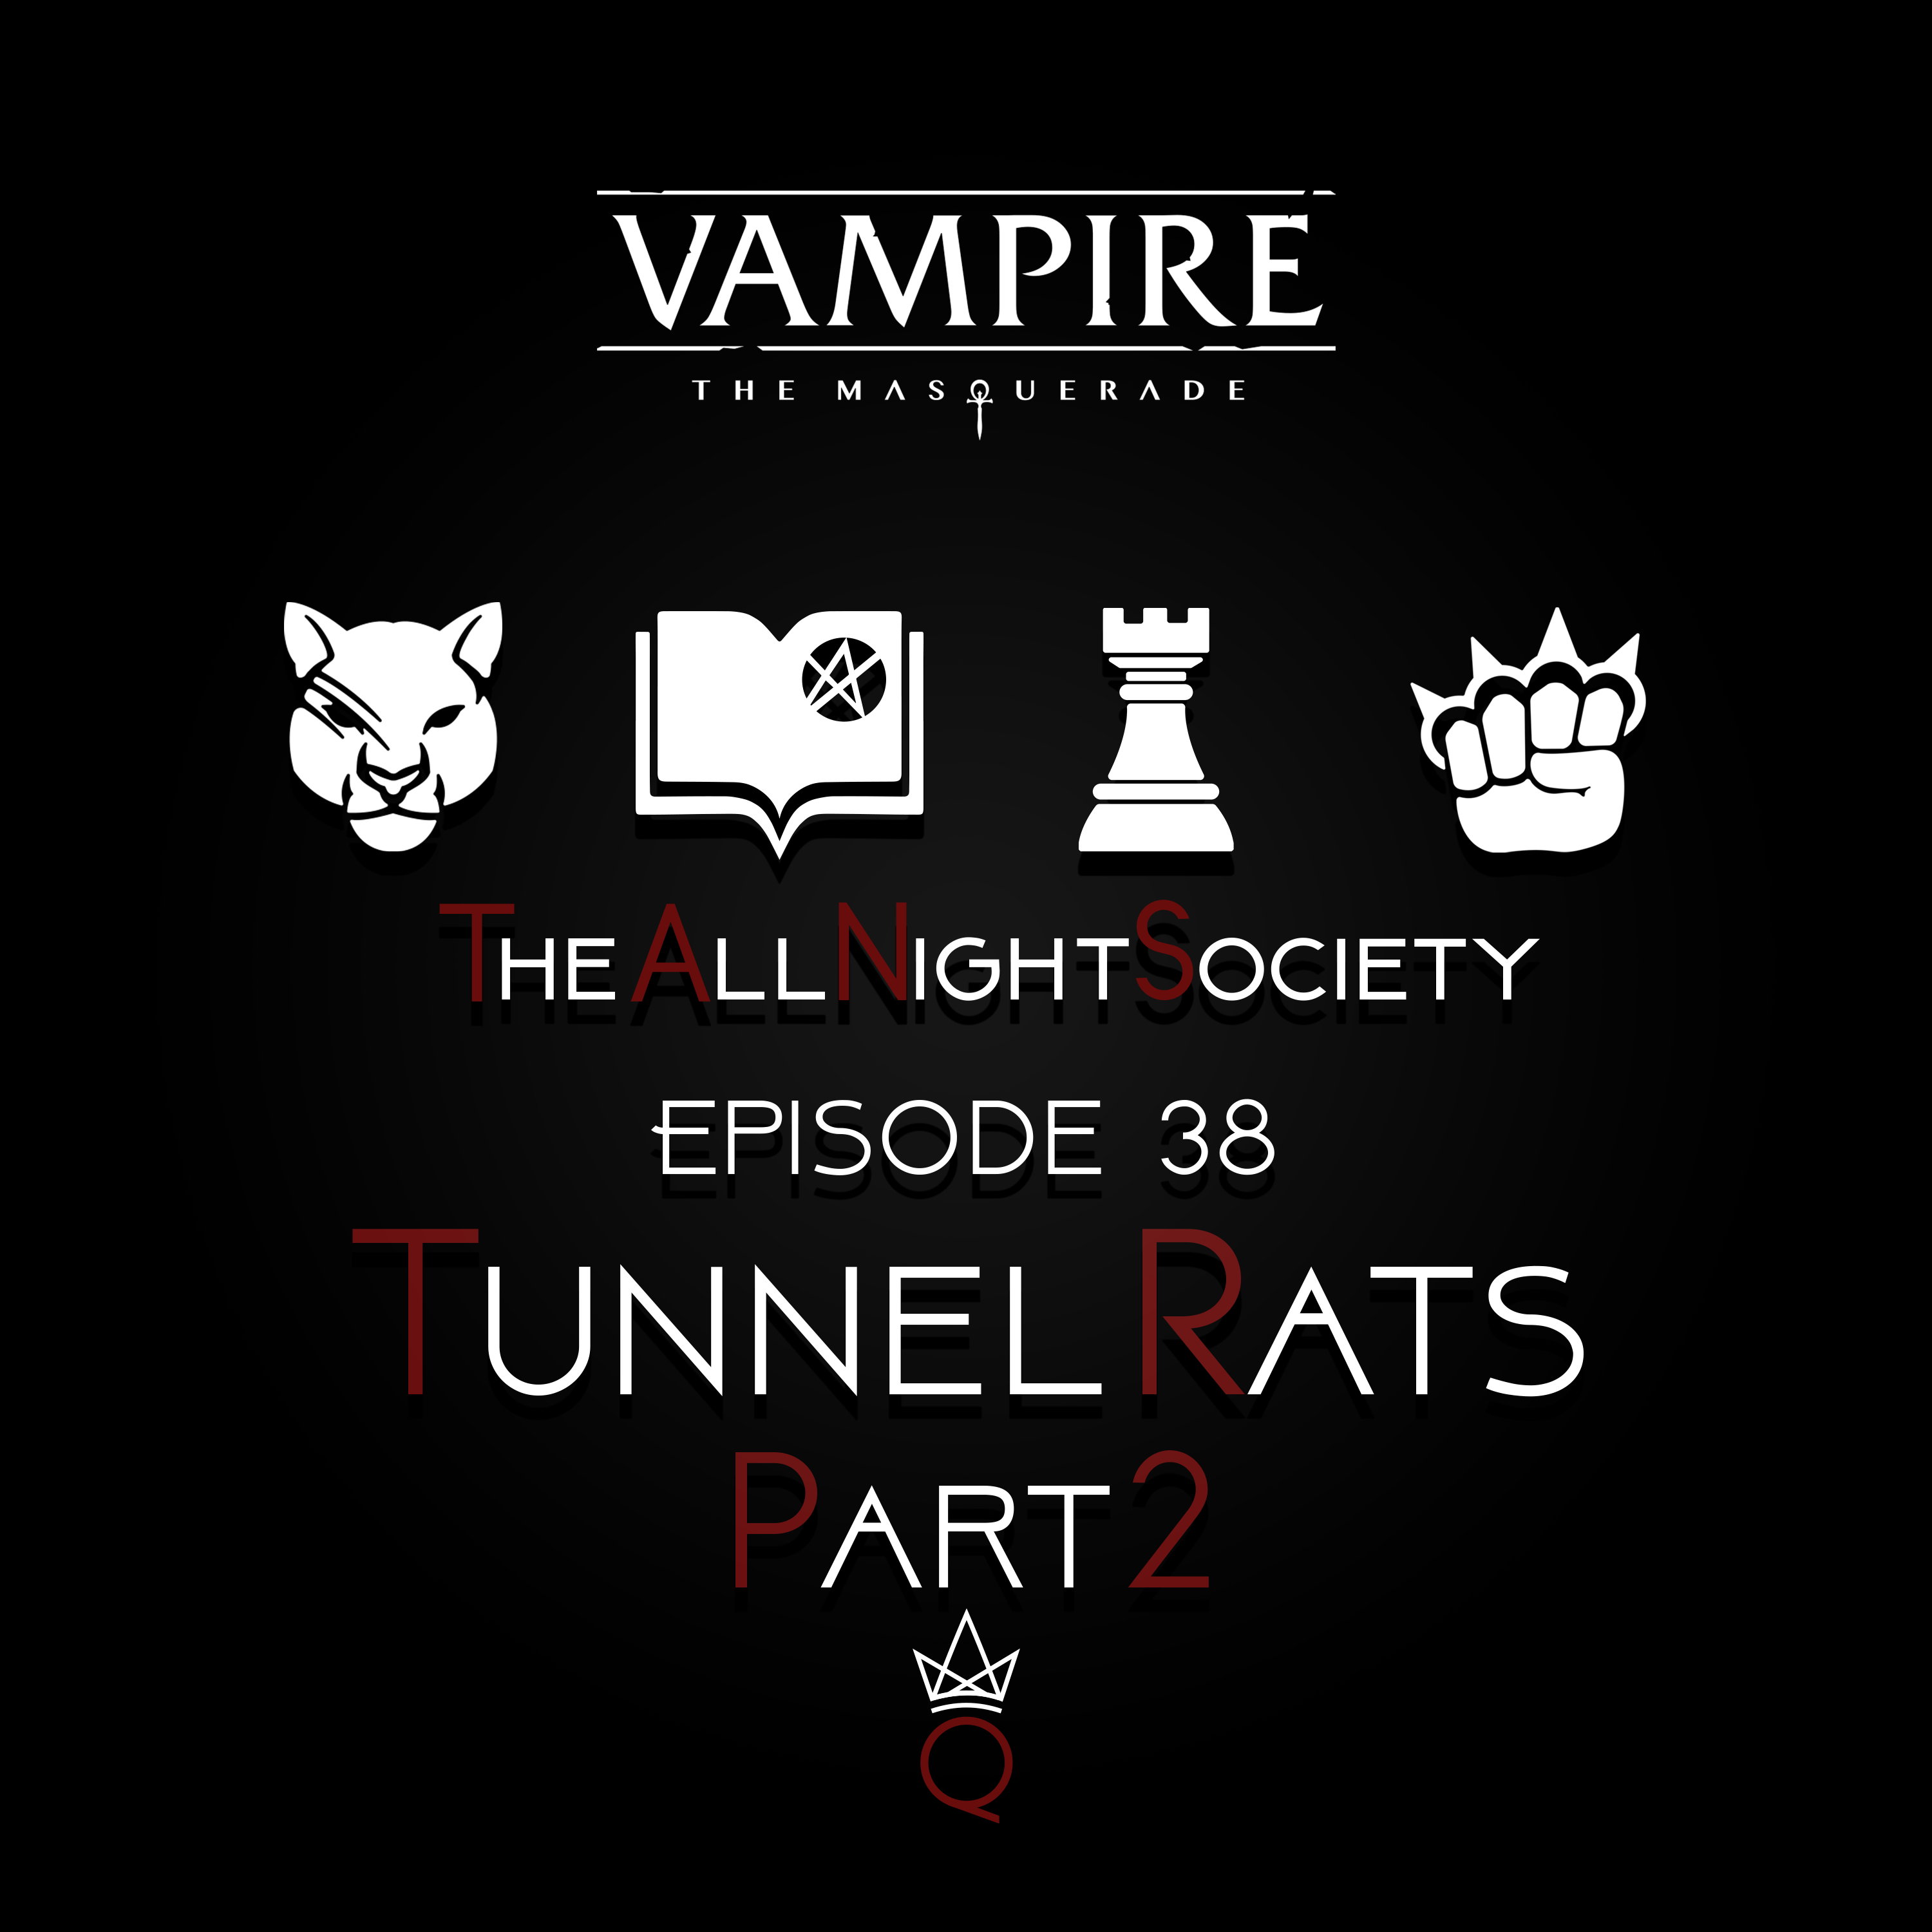 Episode 38 - Tunnel Rats, Part 2